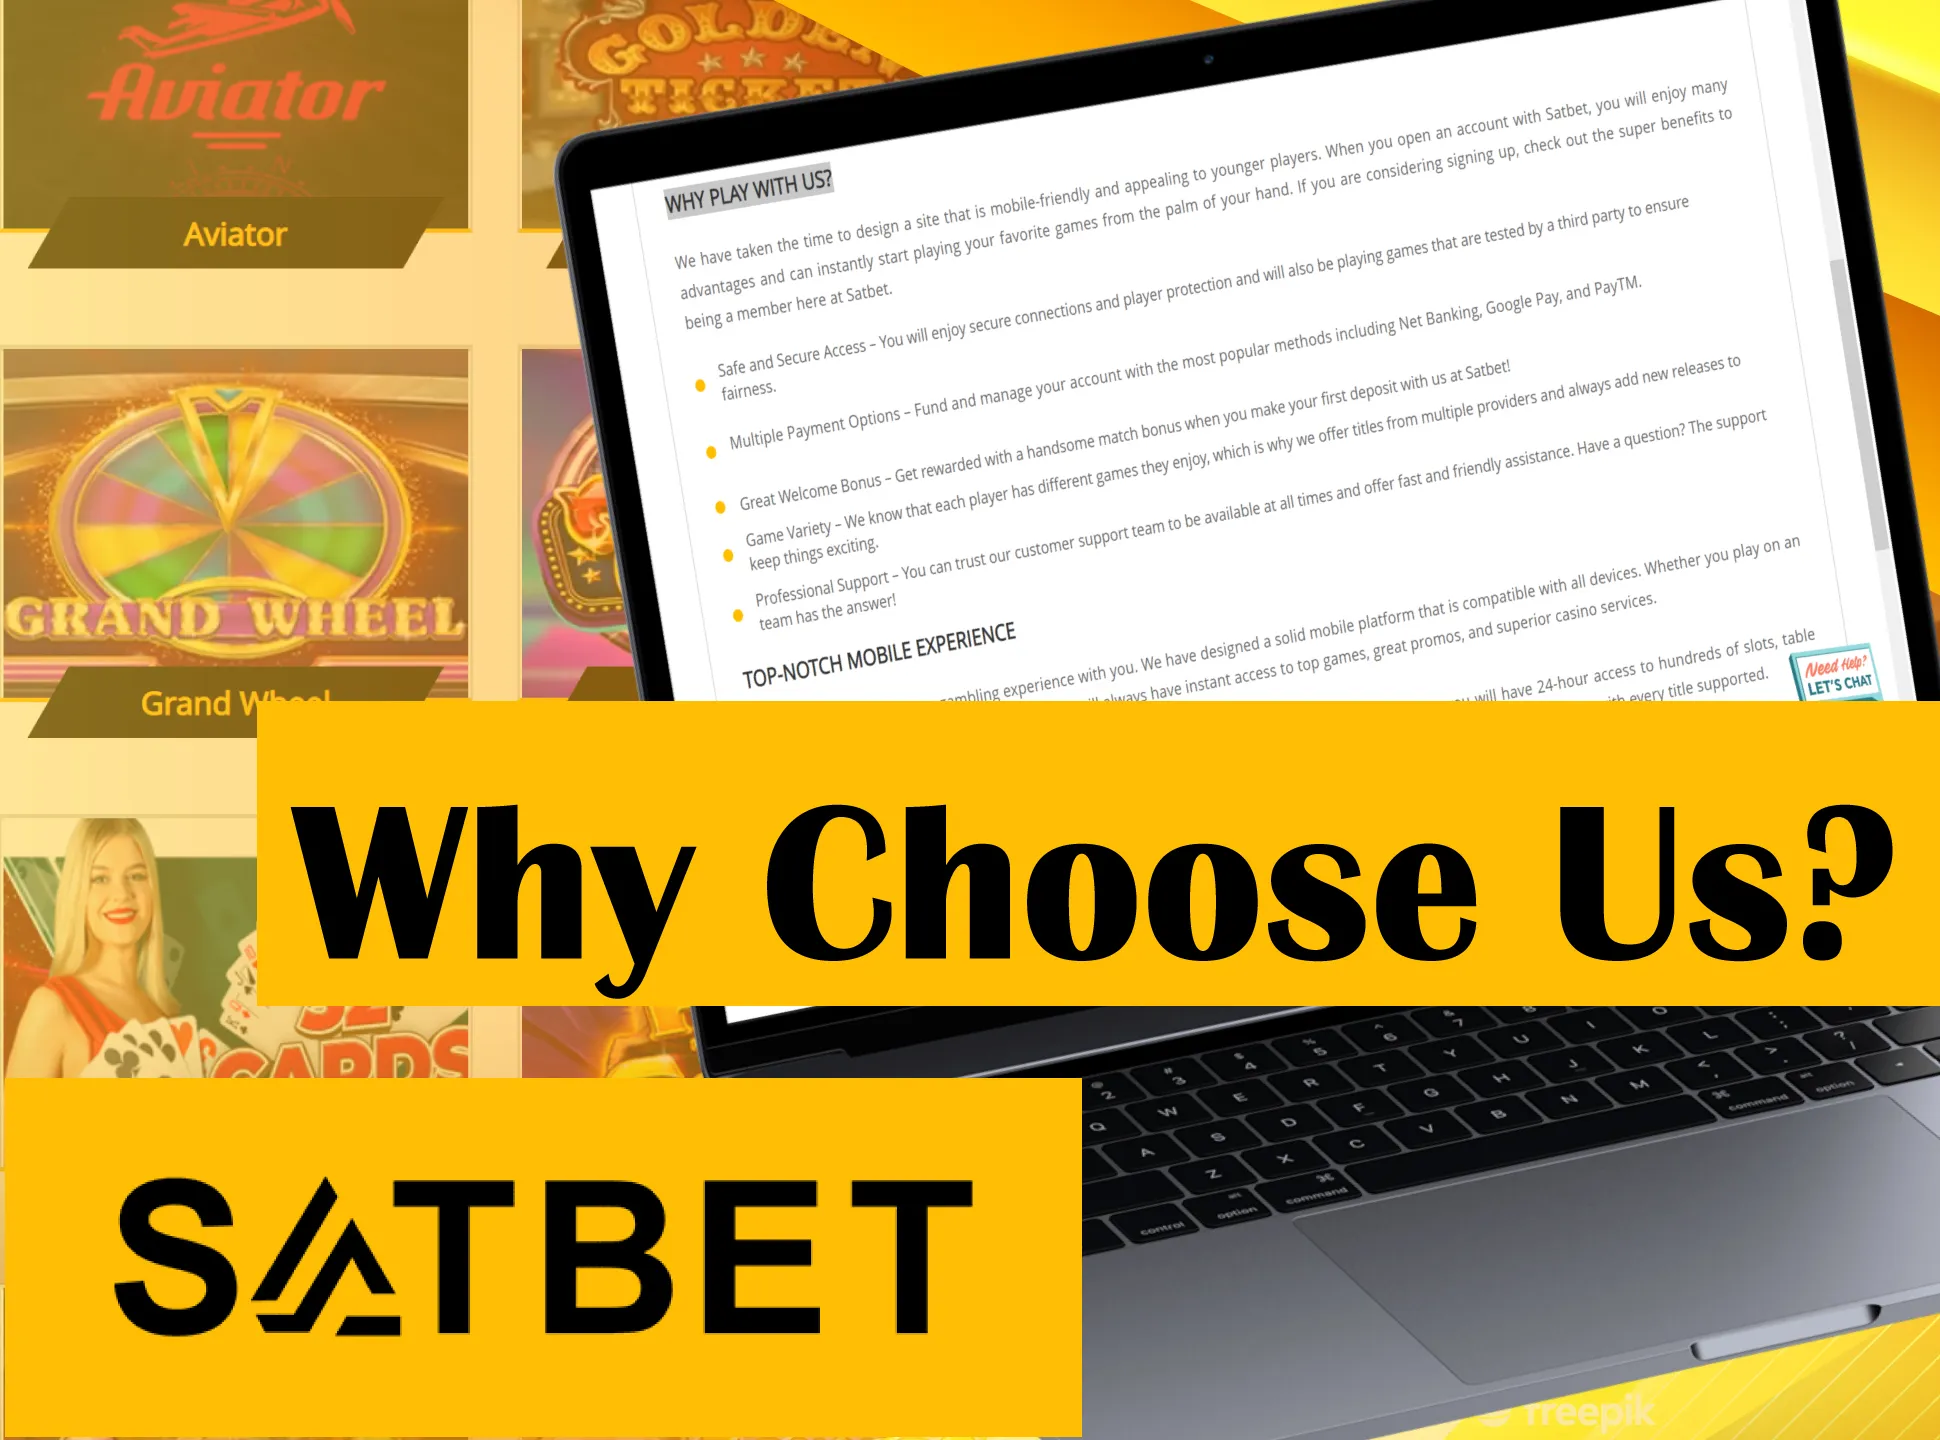 Satbet betting company is a great place to bet at.